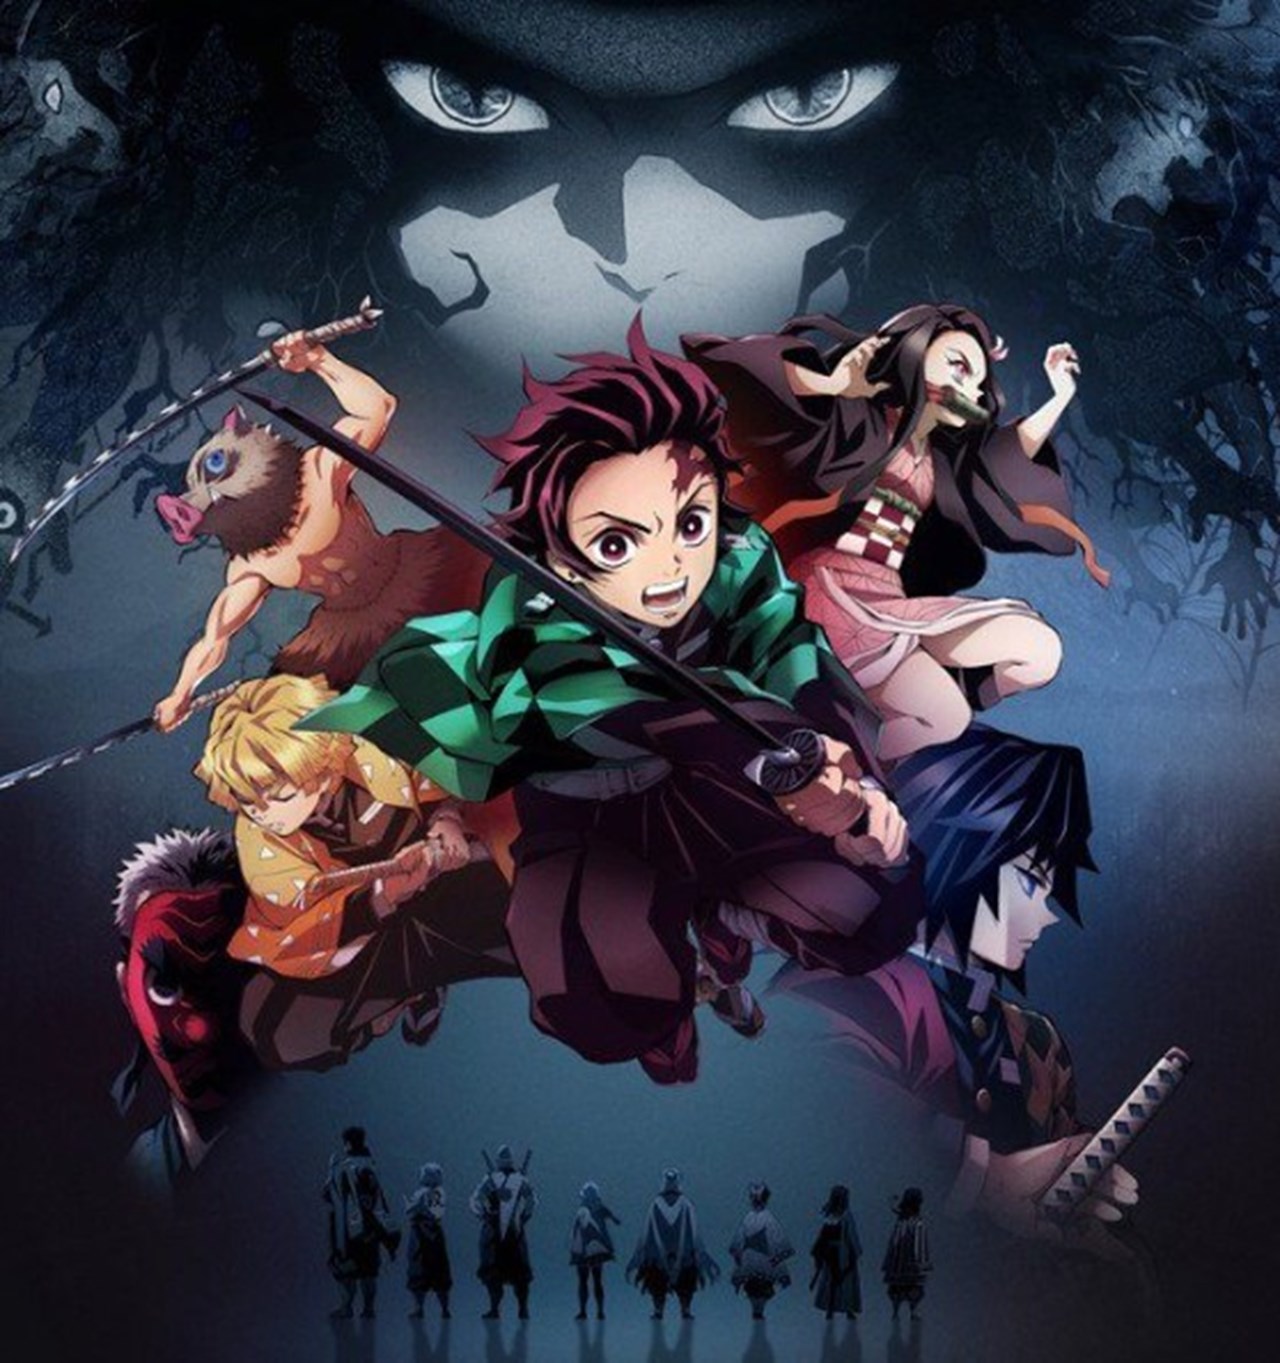 Demon Slayer: What to Expect From Season 3 (According to the Manga)